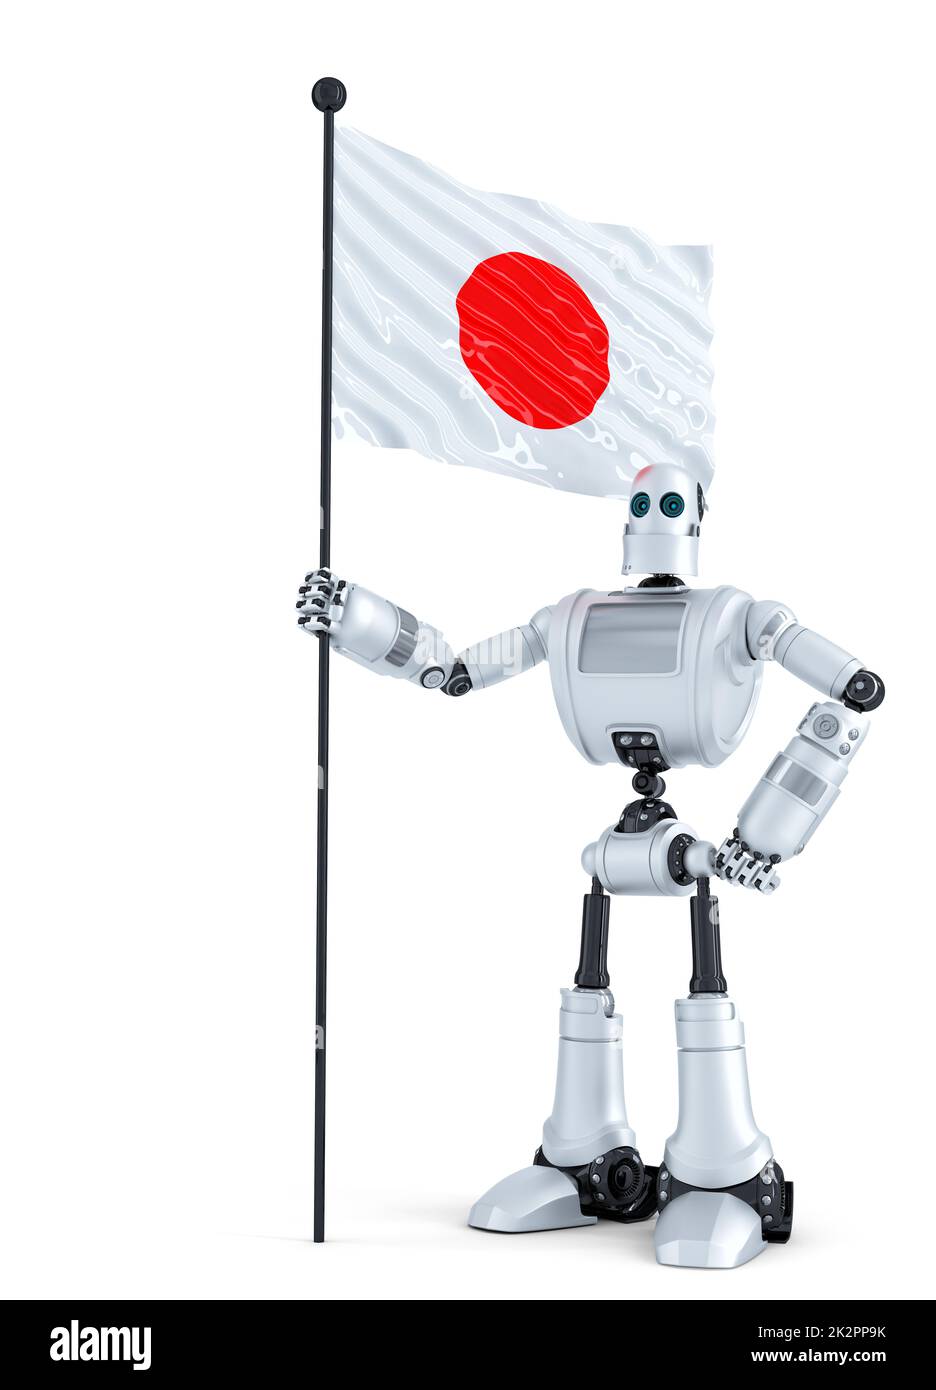 Android Robot standing with flag of Japan. Isolated. Contains clipping path Stock Photo